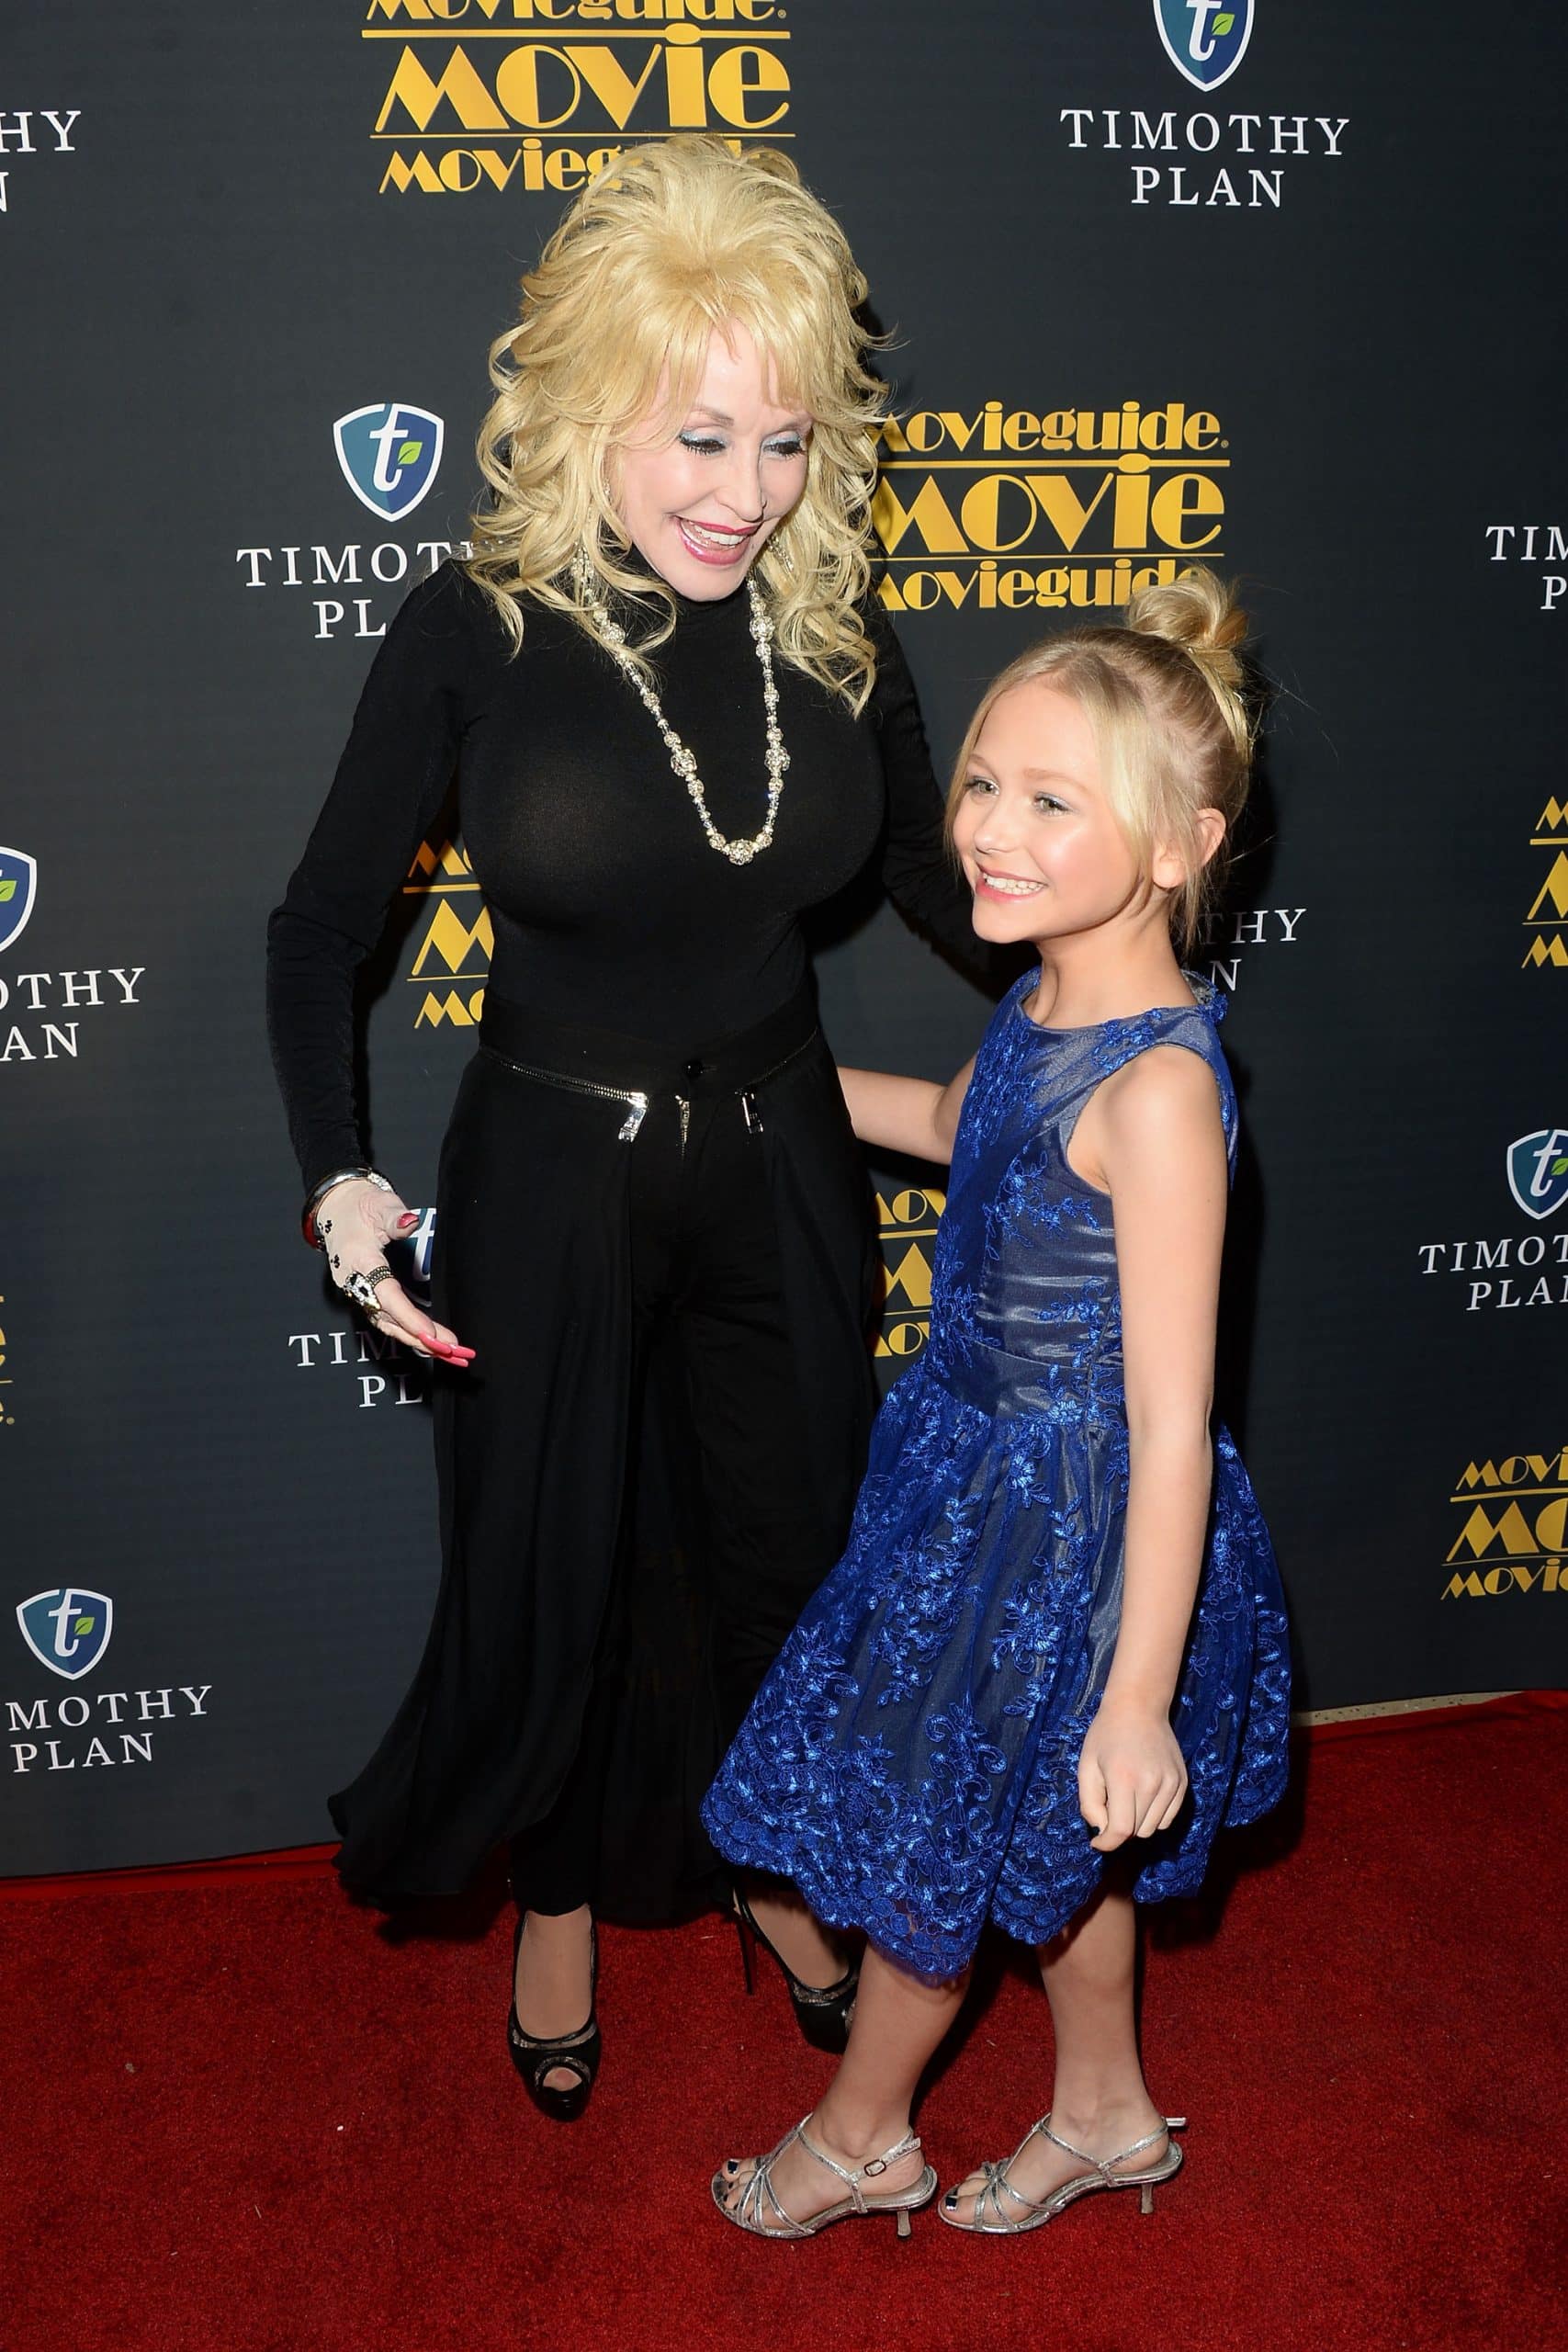 Alyvia Alyn Lind, the actress who played Dolly Parton in the Coat of Many Colors movies, is pictured here with Dolly at the 24th annual Movieguide Awards Gala at Universal Hilton Hotel in 2016.